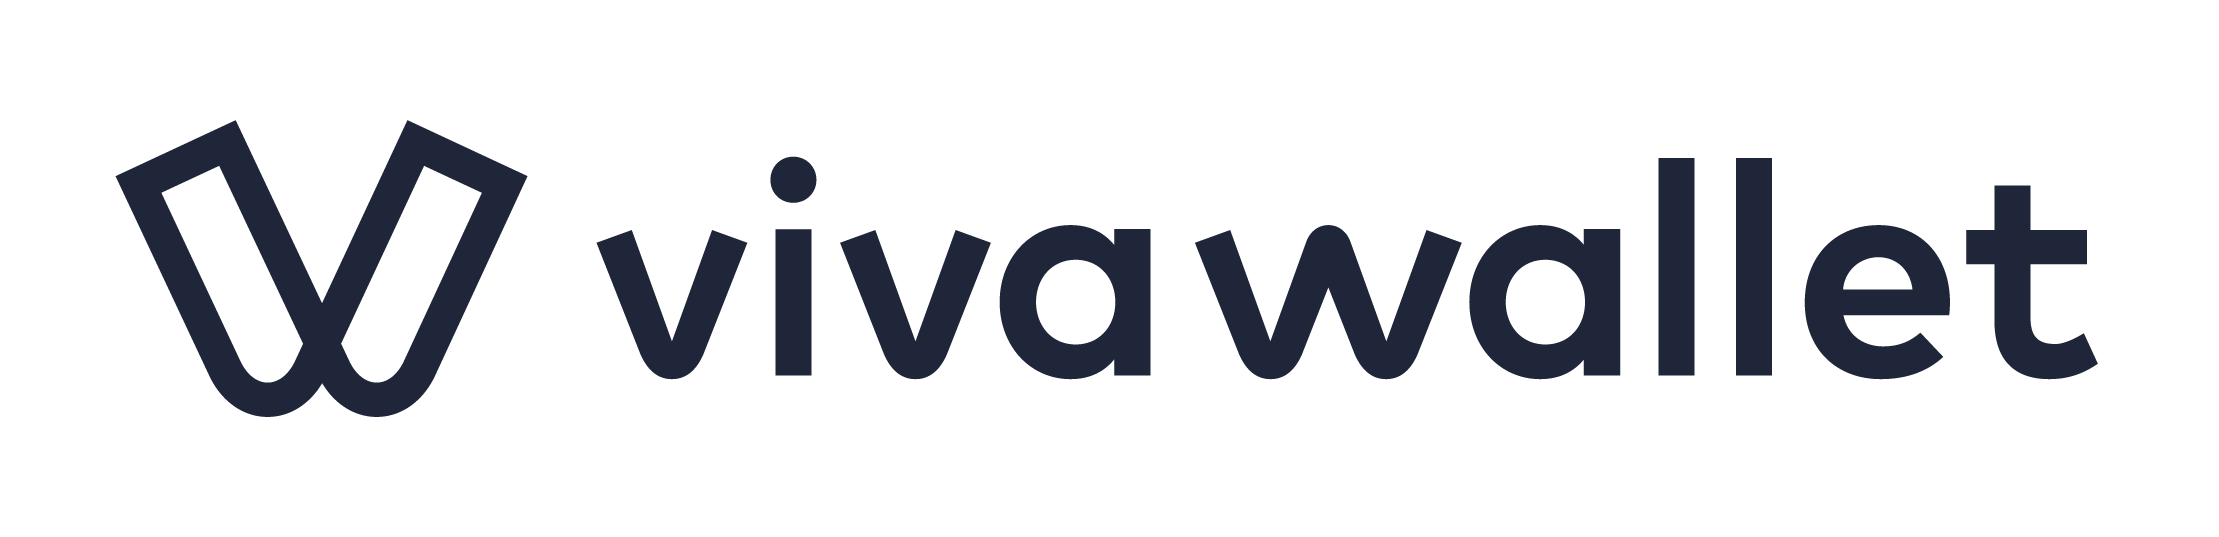 How Viva Wallet cuts through the chaos of rapid growth by automating their Onboarding and Performance cycles